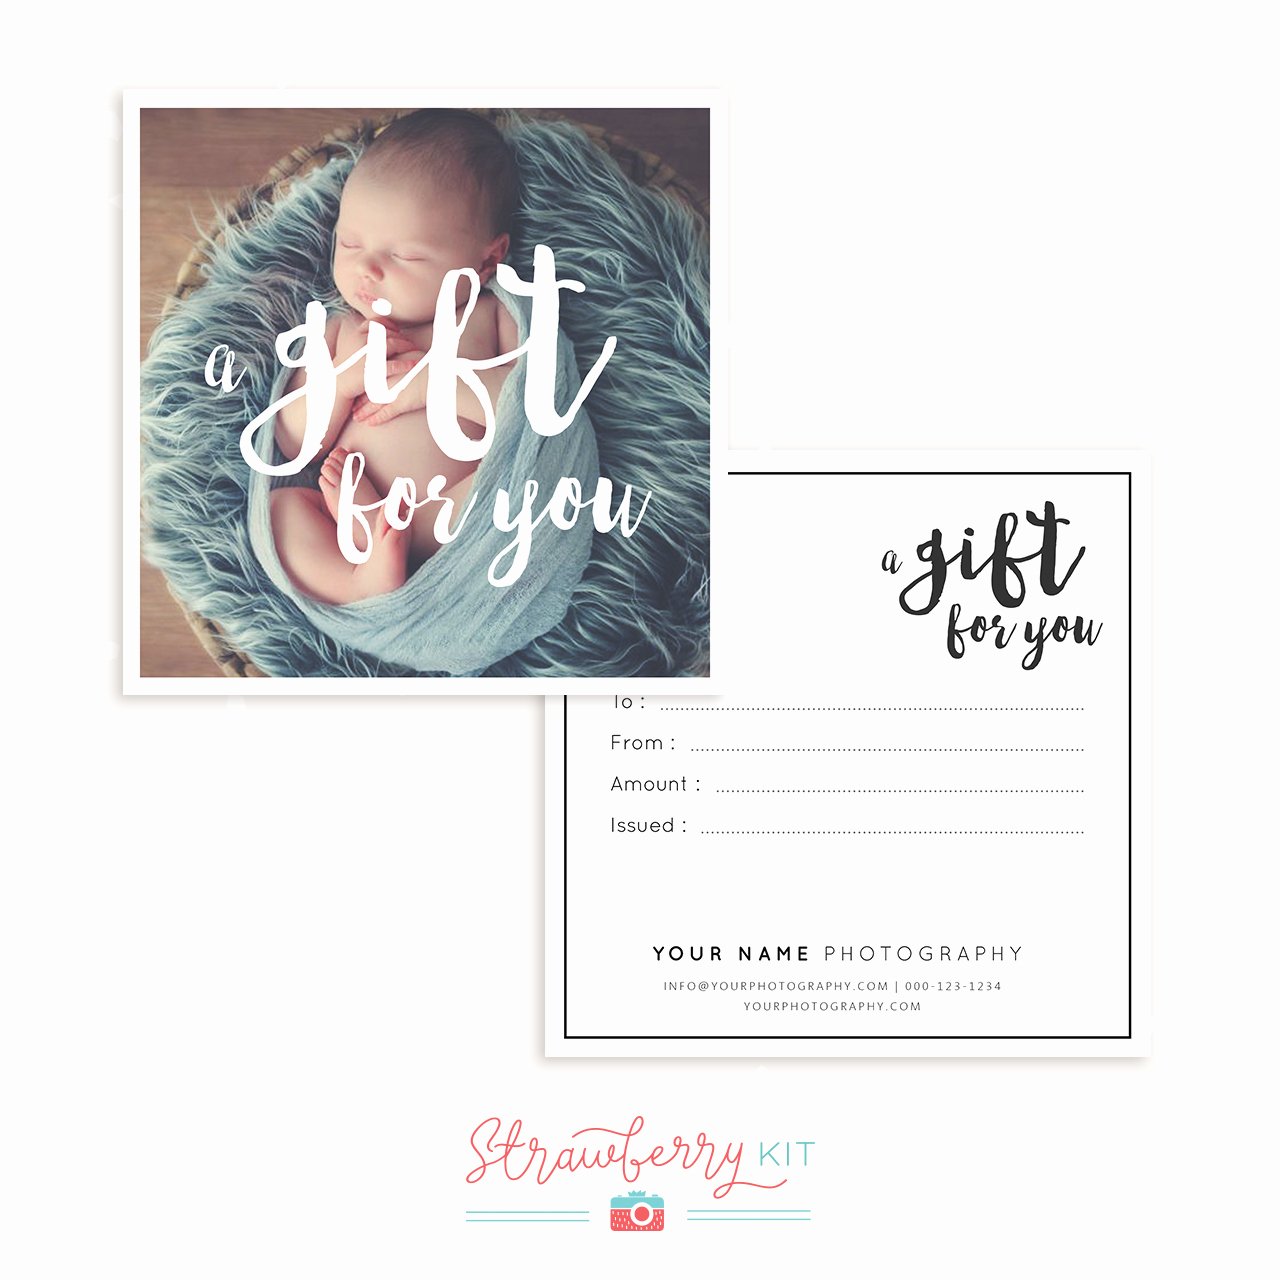 Free Photo Session Gift Certificate Template New A T for You Gift Certificate Strawberry Kit